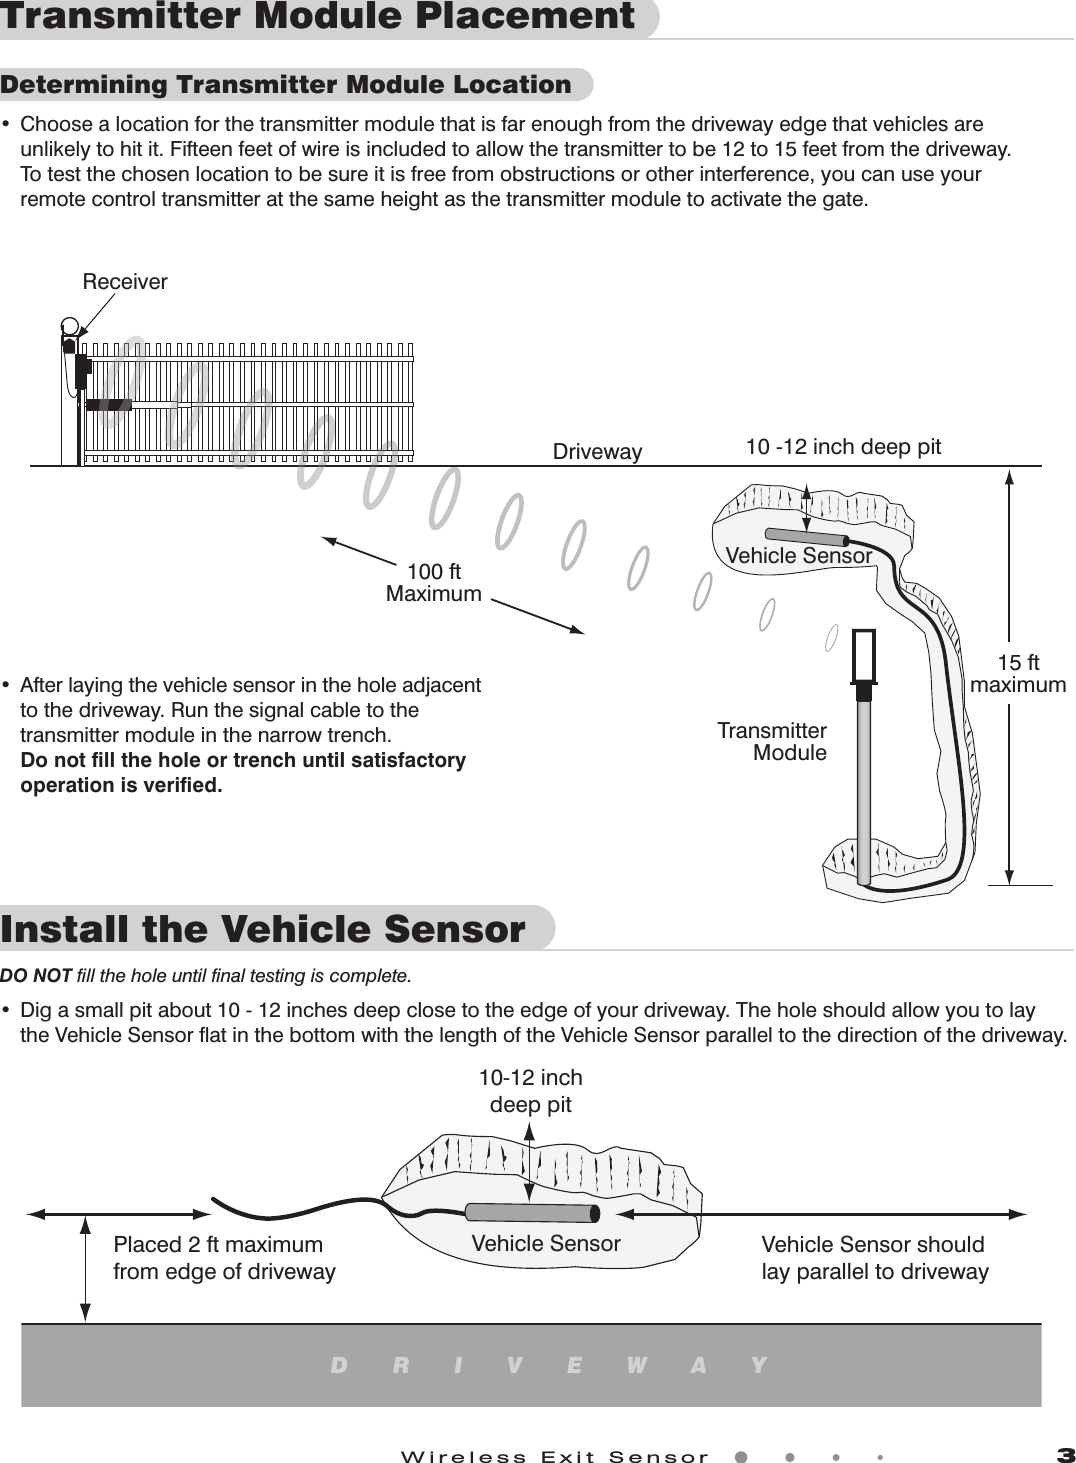 Wireless Exit Sensor             3ReceiverTransmitterModuleDriveway 10 -12 inch deep pit15 ftmaximumVehicle Sensor100 ftMaximumInstall the Vehicle Sensor DO NOT ﬁll the hole until ﬁnal testing is complete.• Digasmallpitabout10-12inchesdeepclosetotheedgeofyourdriveway.Theholeshouldallowyoutolay theVehicleSensoratinthebottomwiththelengthoftheVehicleSensorparalleltothedirectionofthedriveway.• Afterlayingthevehiclesensorintheholeadjacent tothedriveway.Runthesignalcabletothe transmittermoduleinthenarrowtrench.Do not ﬁll the hole or trench until satisfactory    operation is veriﬁed.Vehicle Sensor10-12 inchdeep pitPlaced 2 ft maximumfrom edge of drivewayVehicle Sensor shouldlay parallel to drivewayDRIVEWAYTransmitter Module PlacementDetermining Transmitter Module Location• Choosealocationforthetransmittermodulethatisfarenoughfromthedrivewayedgethatvehiclesare  unlikelytohitit.Fifteenfeetofwireisincludedtoallowthetransmittertobe12to15feetfromthedriveway. Totestthechosenlocationtobesureitisfreefromobstructionsorotherinterference,youcanuseyour  remotecontroltransmitteratthesameheightasthetransmittermoduletoactivatethegate.